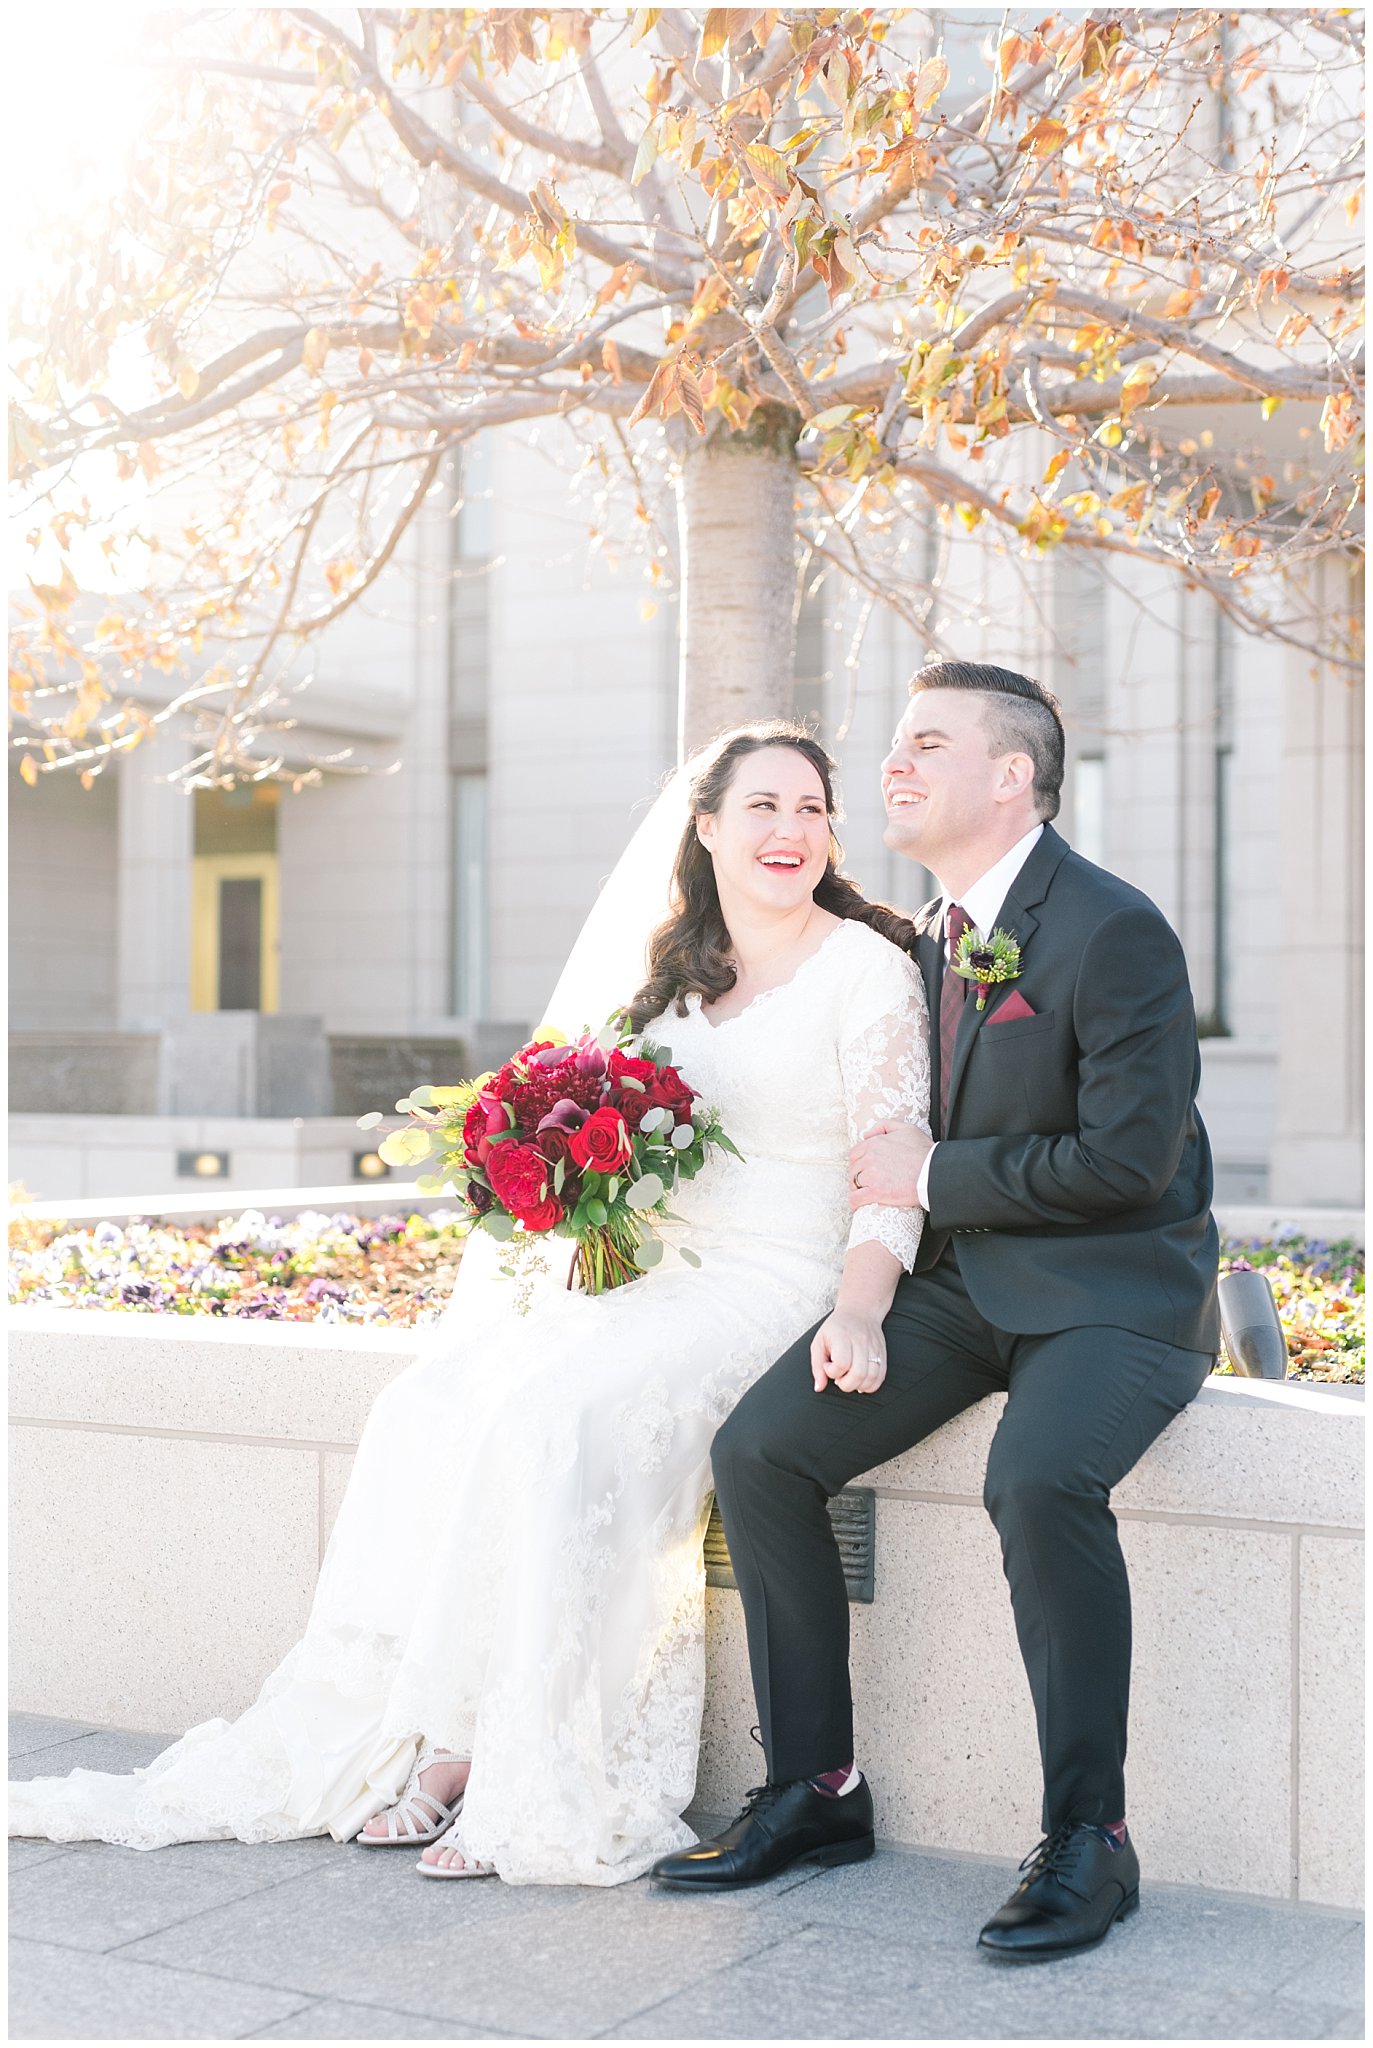 Bride and groom in front of the Oquirrh Mountain temple during winter wedding | Top Utah Wedding and Couples Photos 2019 | Jessie and Dallin Photography